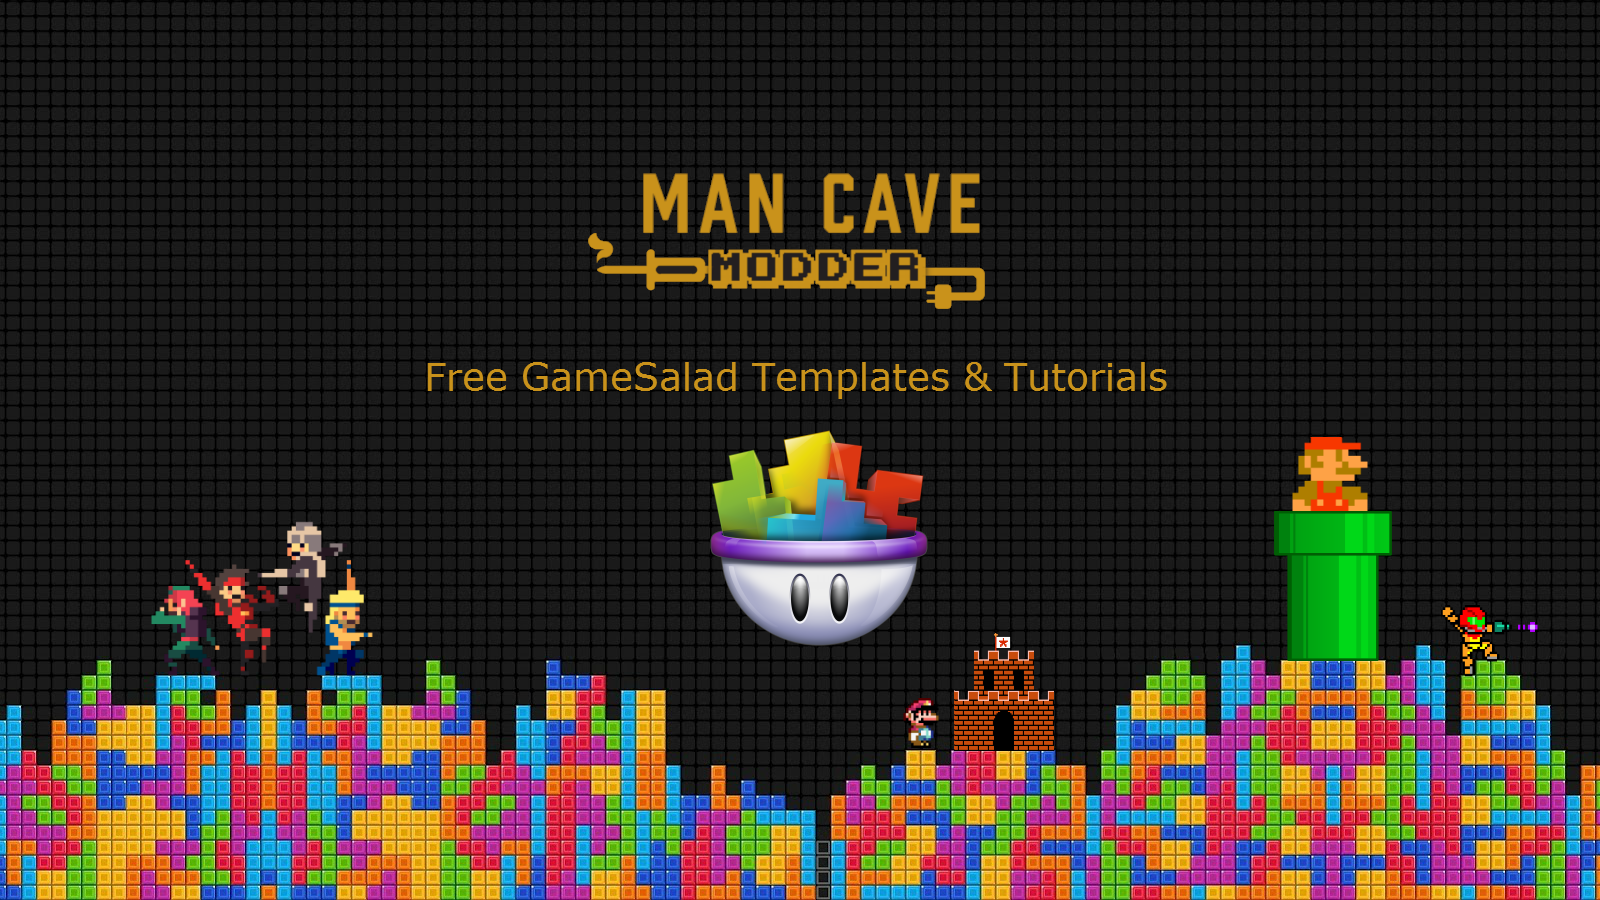 Man Cave Modder Do You Want To Make A Video Game For Android or iOS